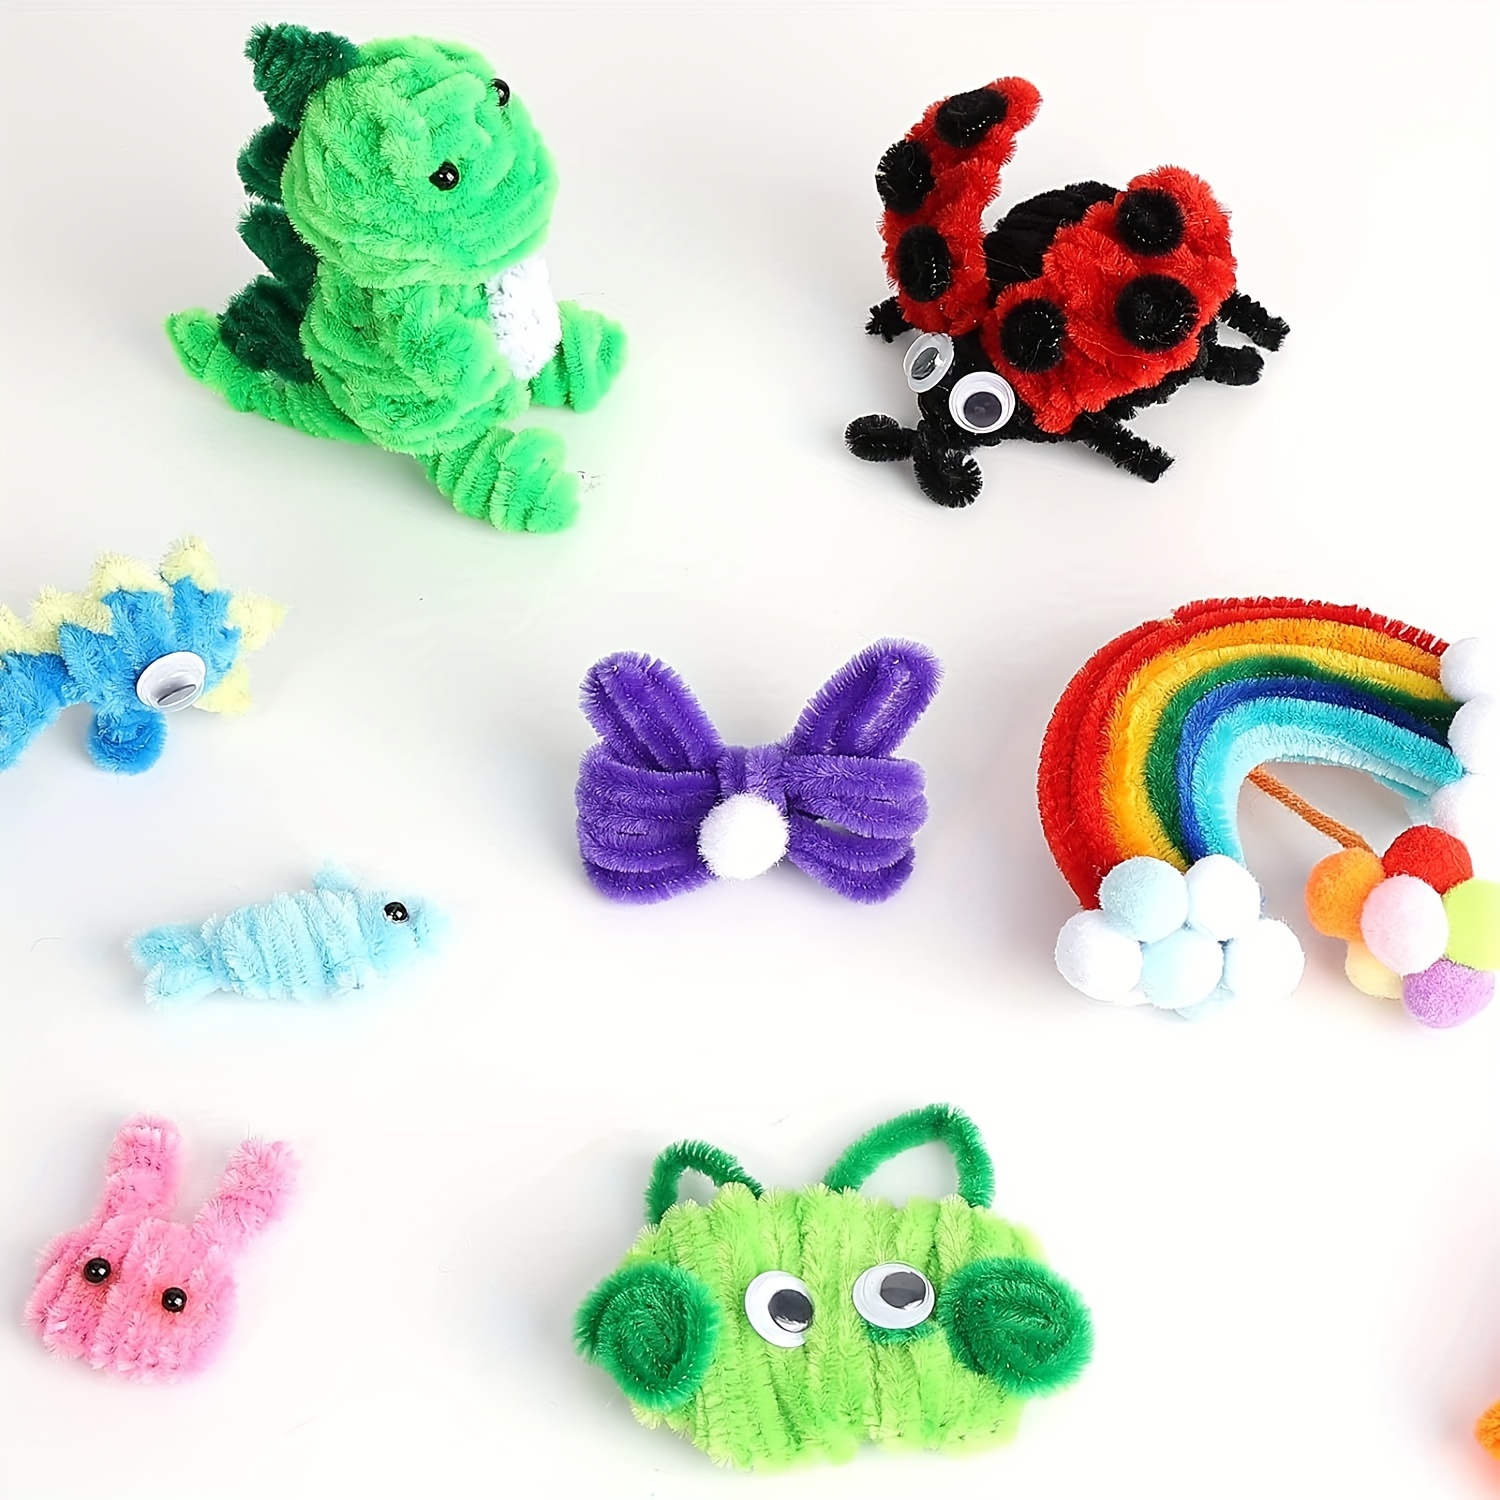 Pipe cleaners craft for DIY Crafts Decorations Creative School